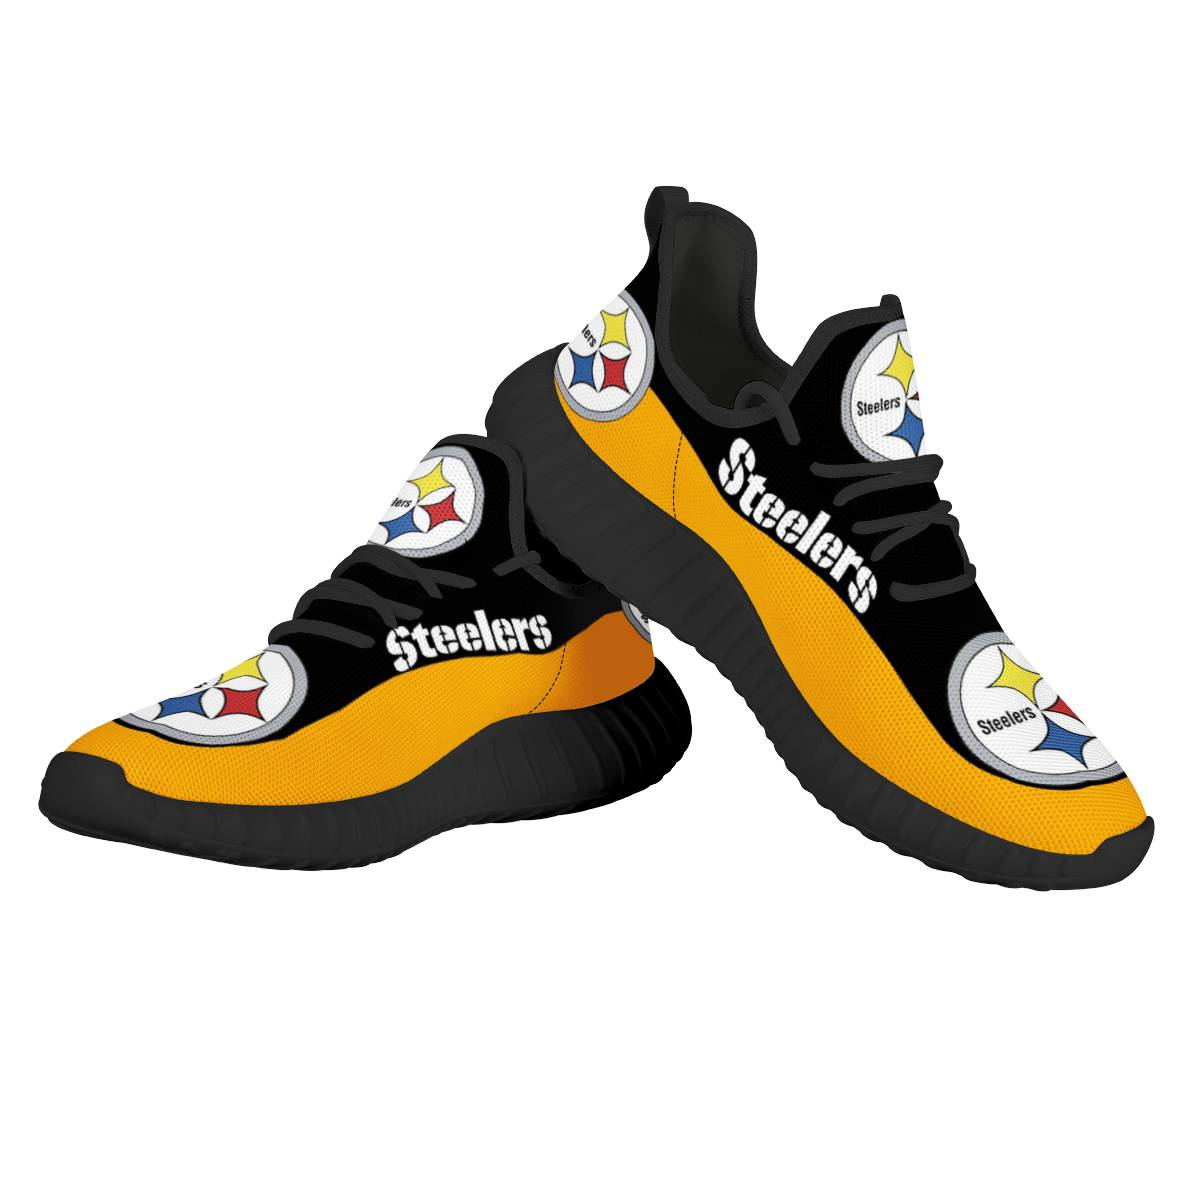 Women's NFL Pittsburgh Steelers Mesh Knit Sneakers/Shoes 007